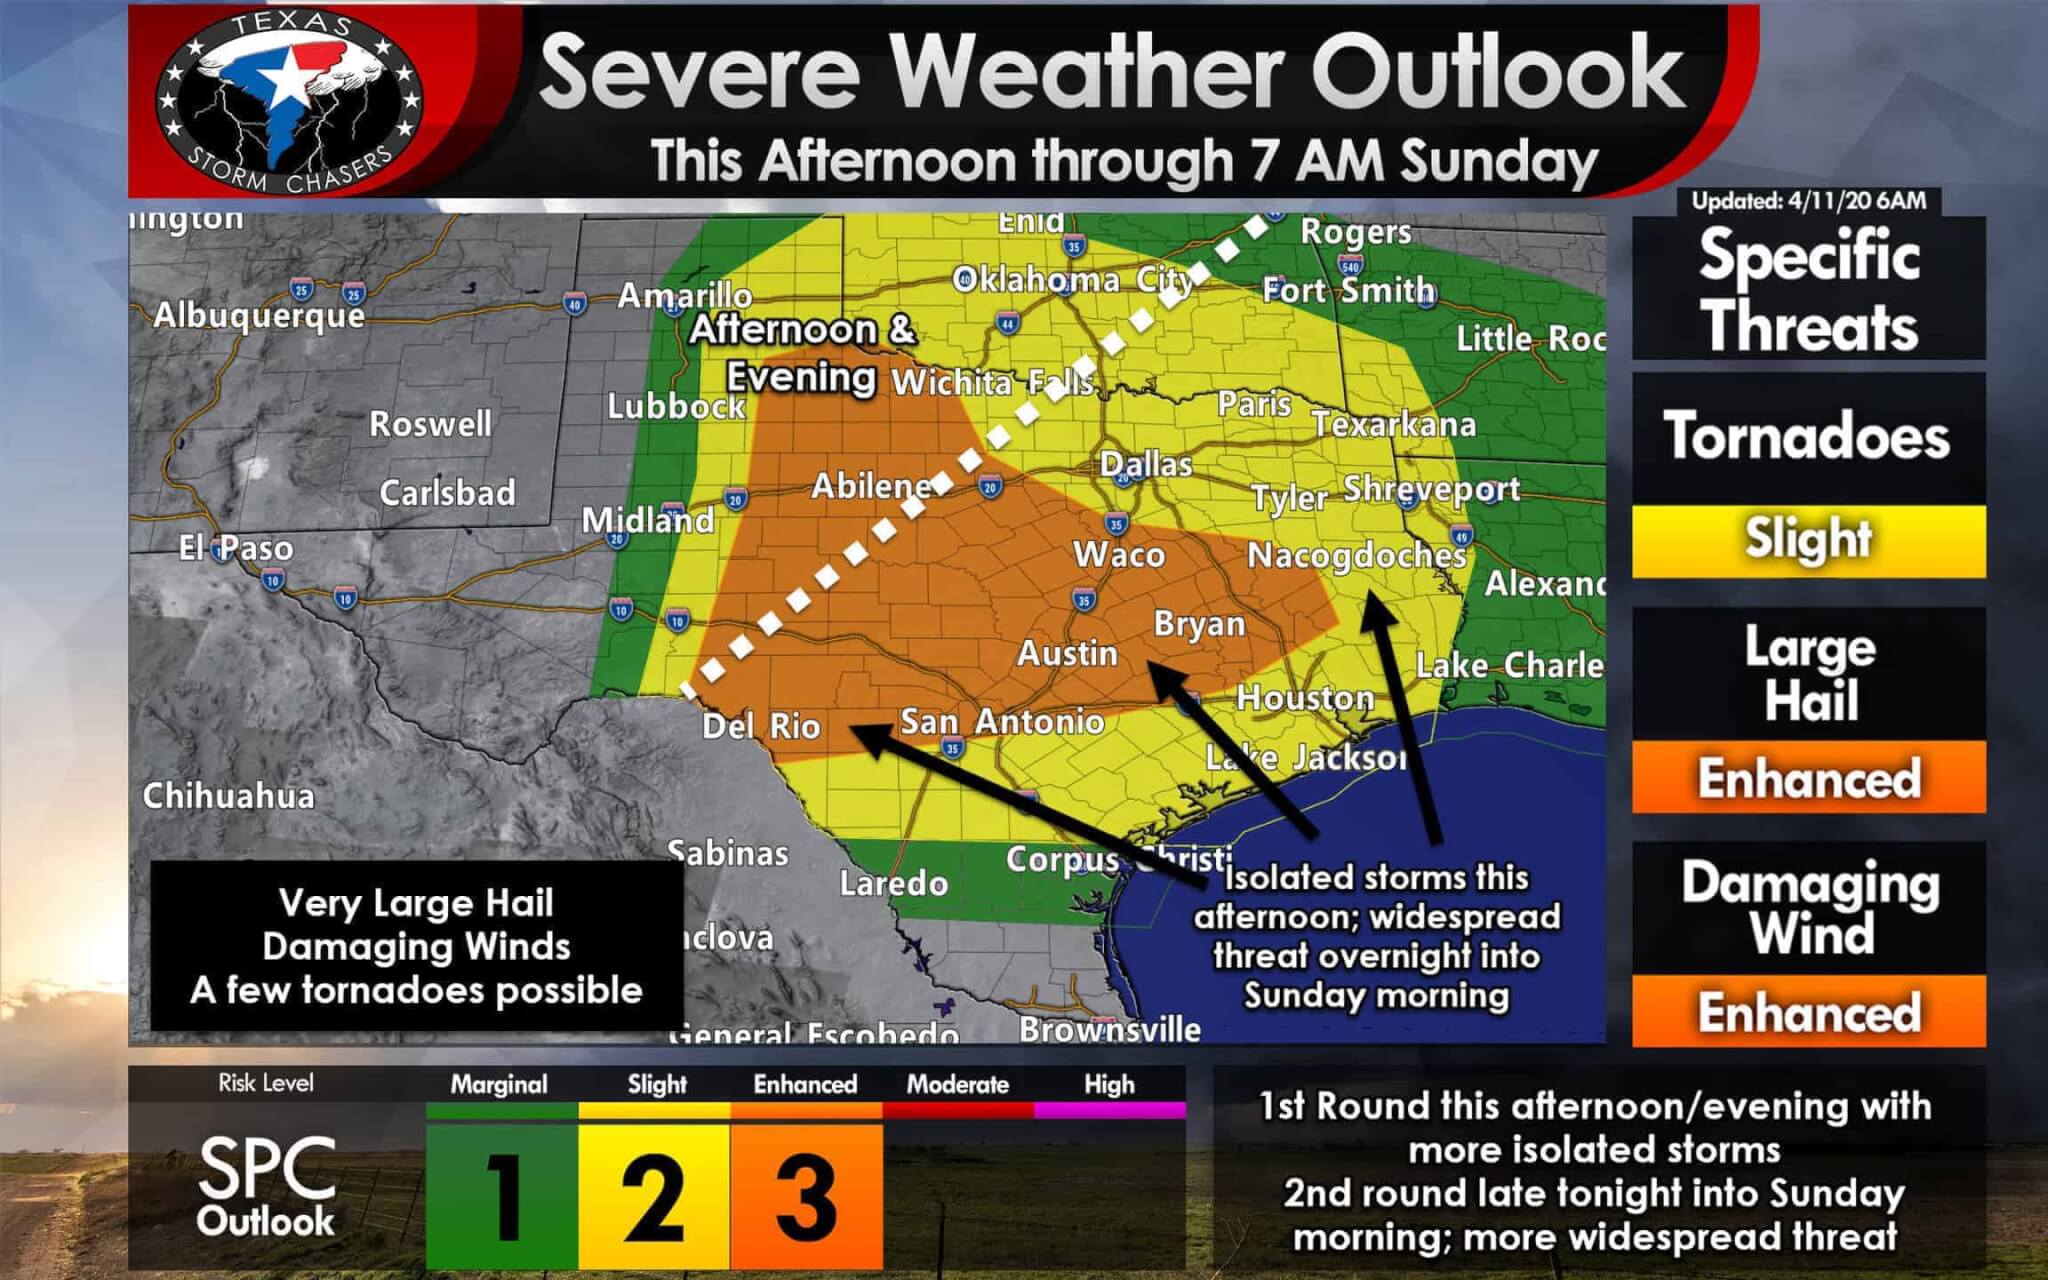 Multiple waves of severe weather possible this afternoon through Sunday morning